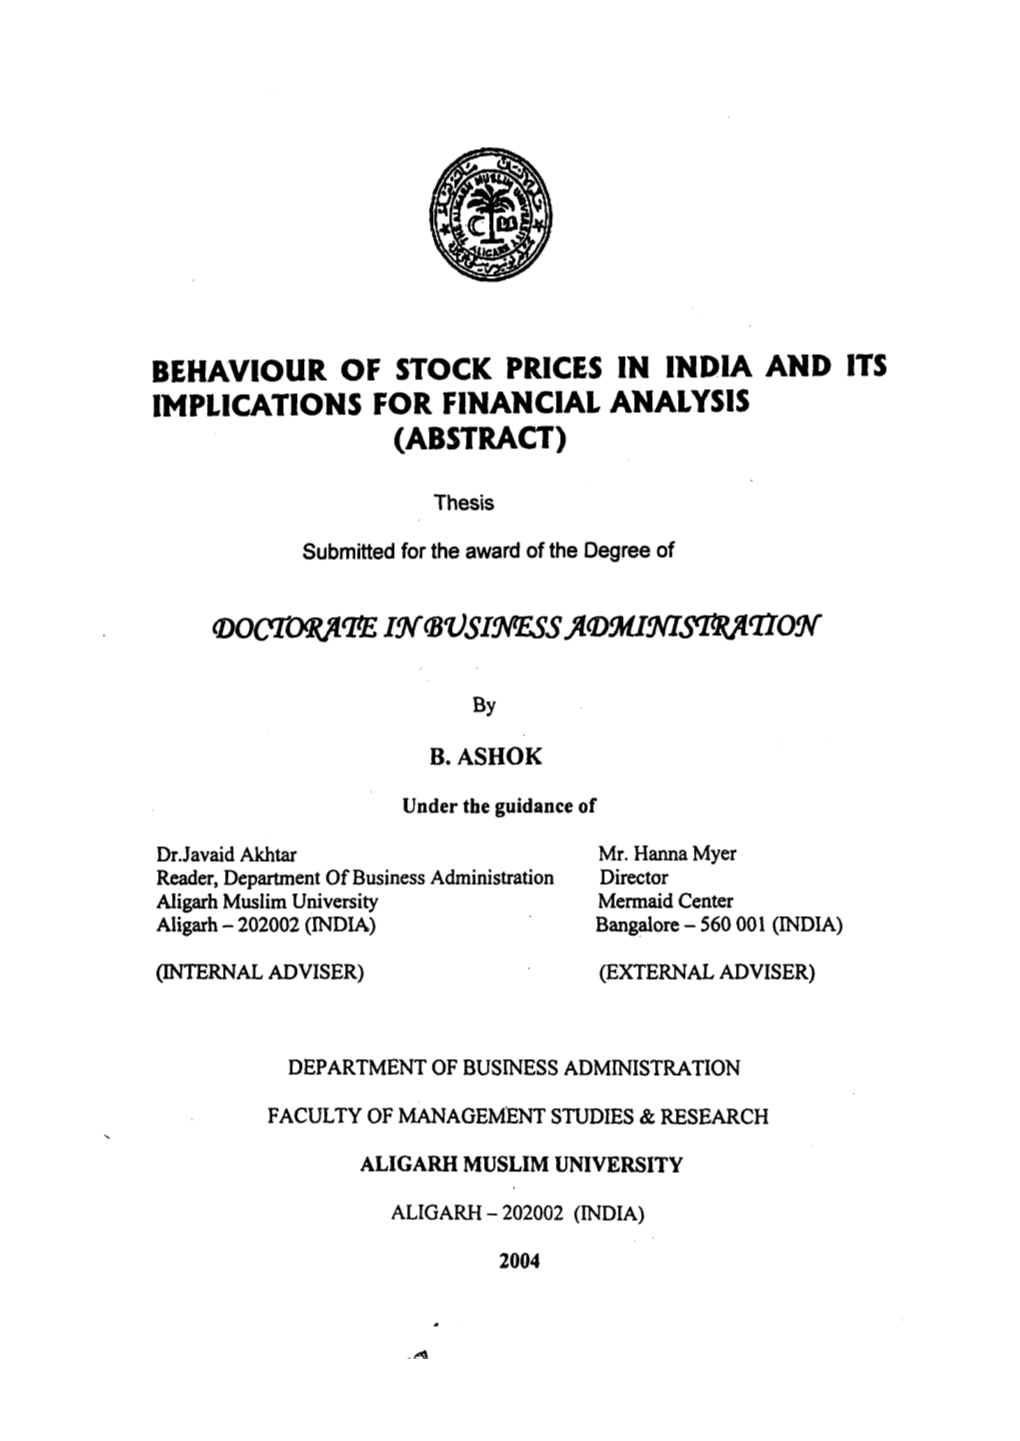 Behaviour of Stock Prices in India and Its Implications for Financial Analysis (Abstract)